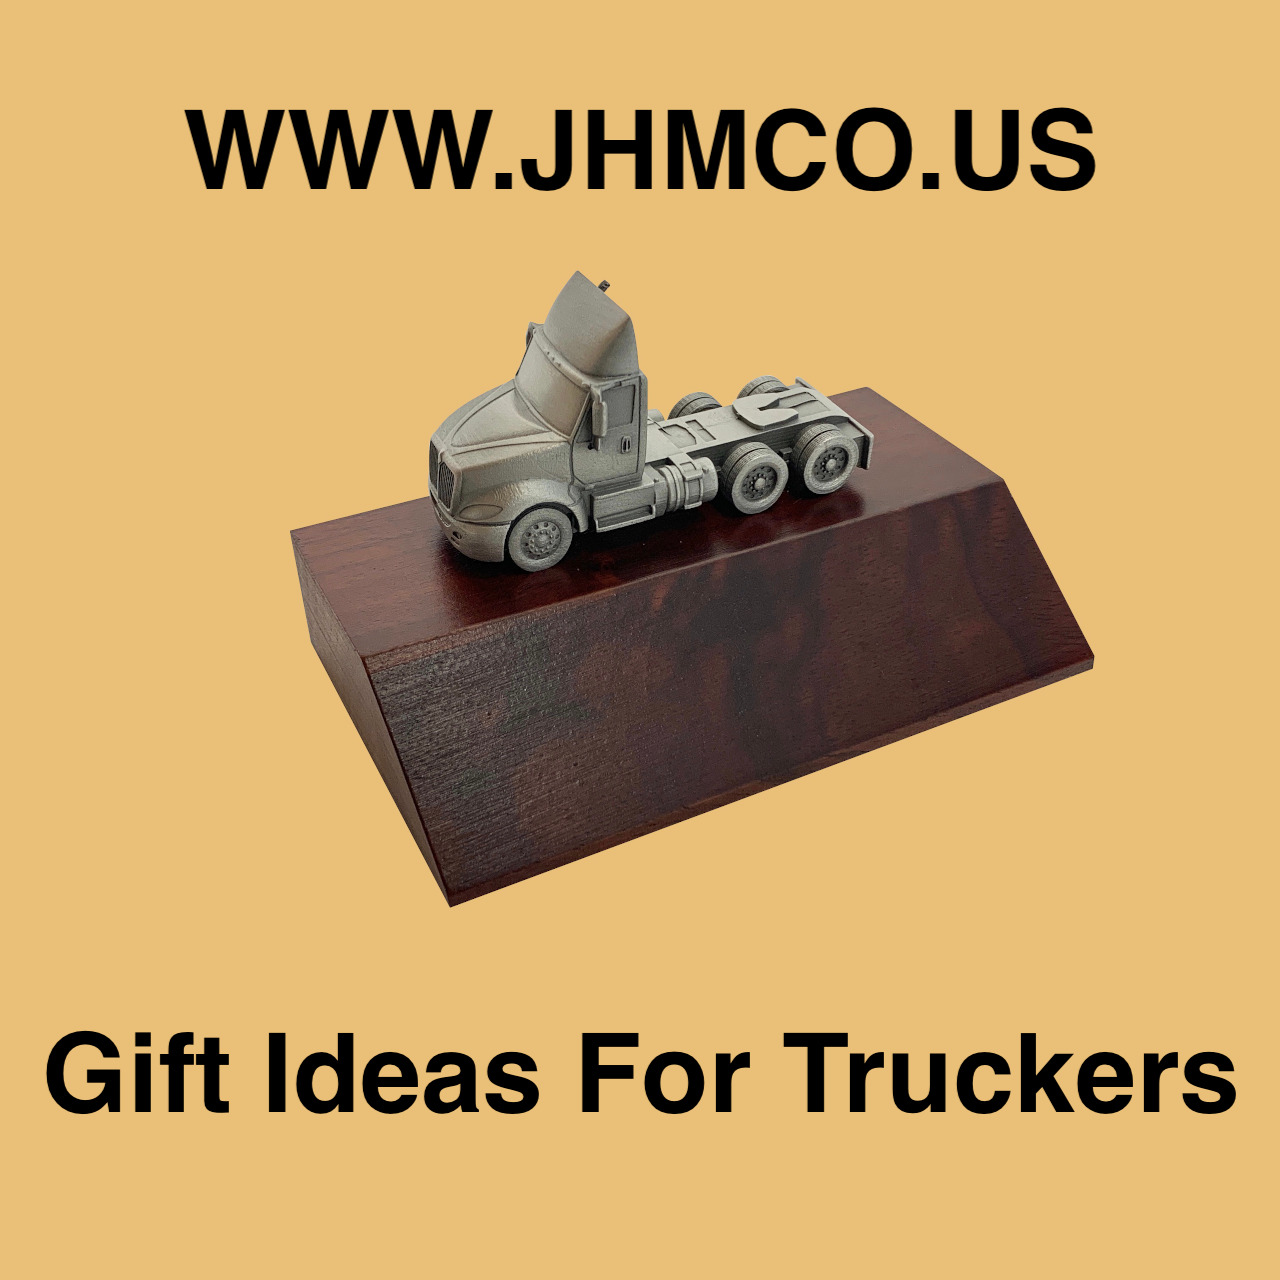 Truckers gifts ideas for truck drivers award collectible item